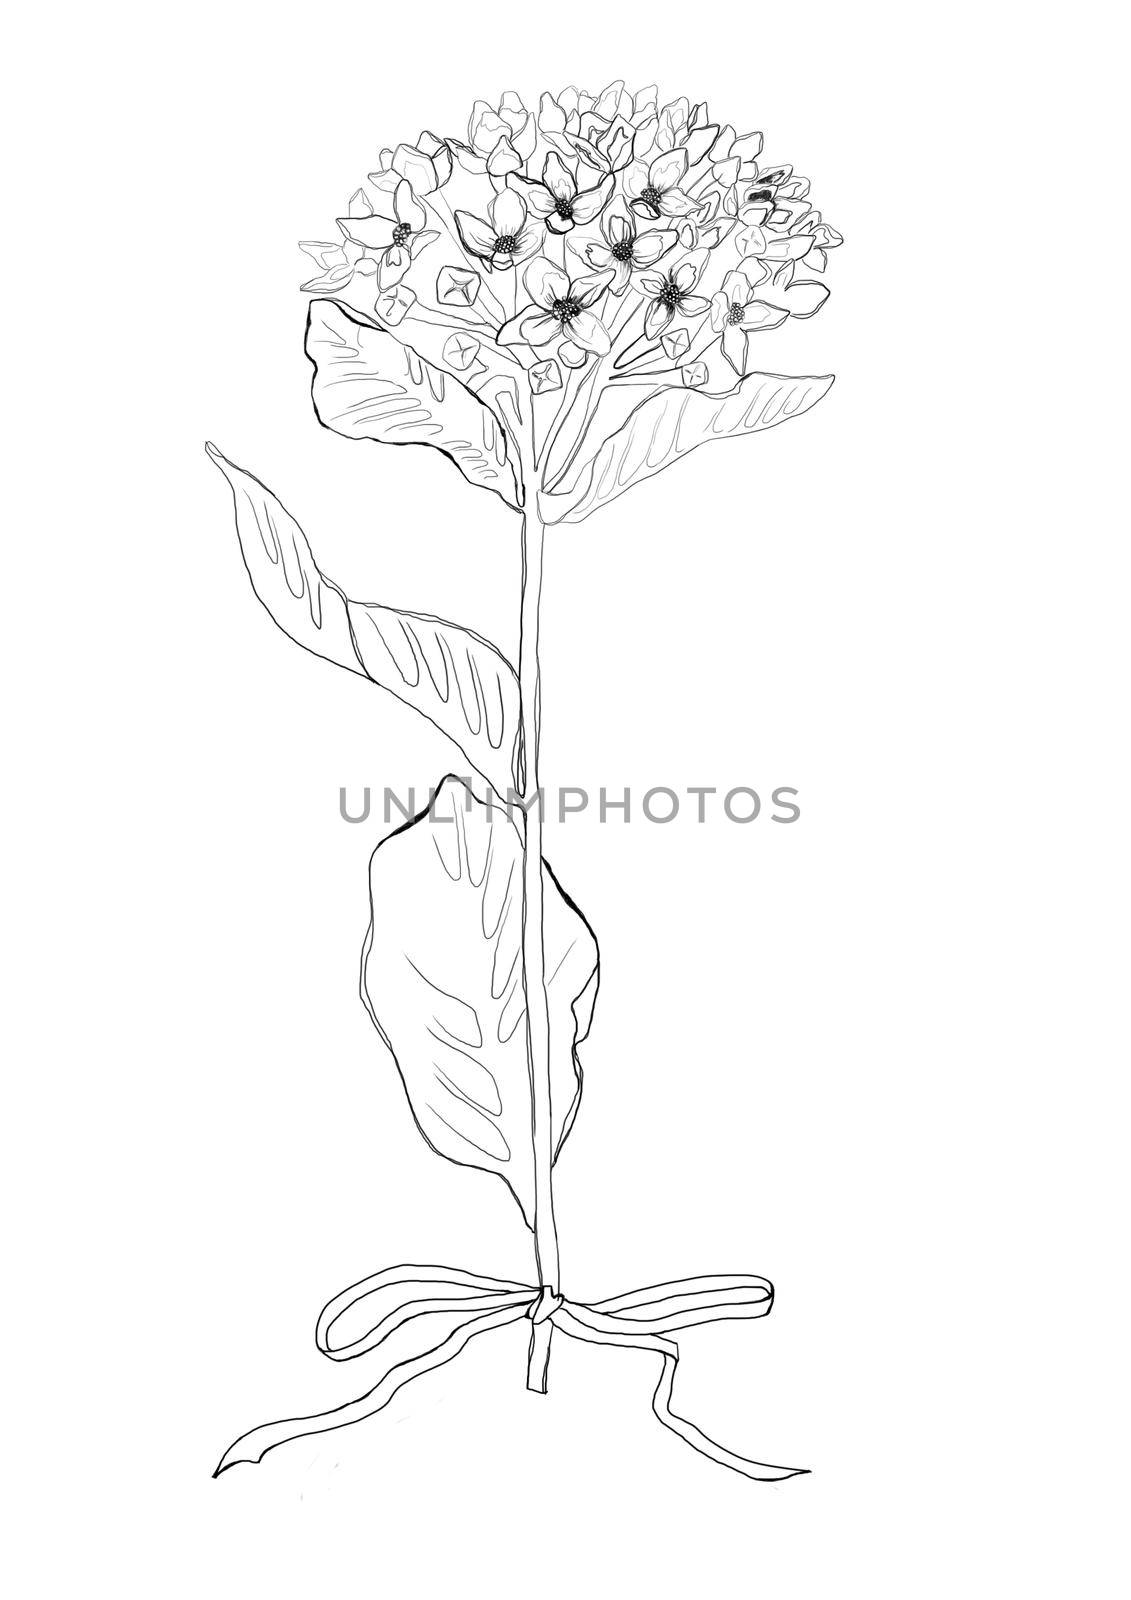 Single flower line art in abstract style on white. White color background. Creative design illustration. Black background. Abstract creative design background. Floral background.